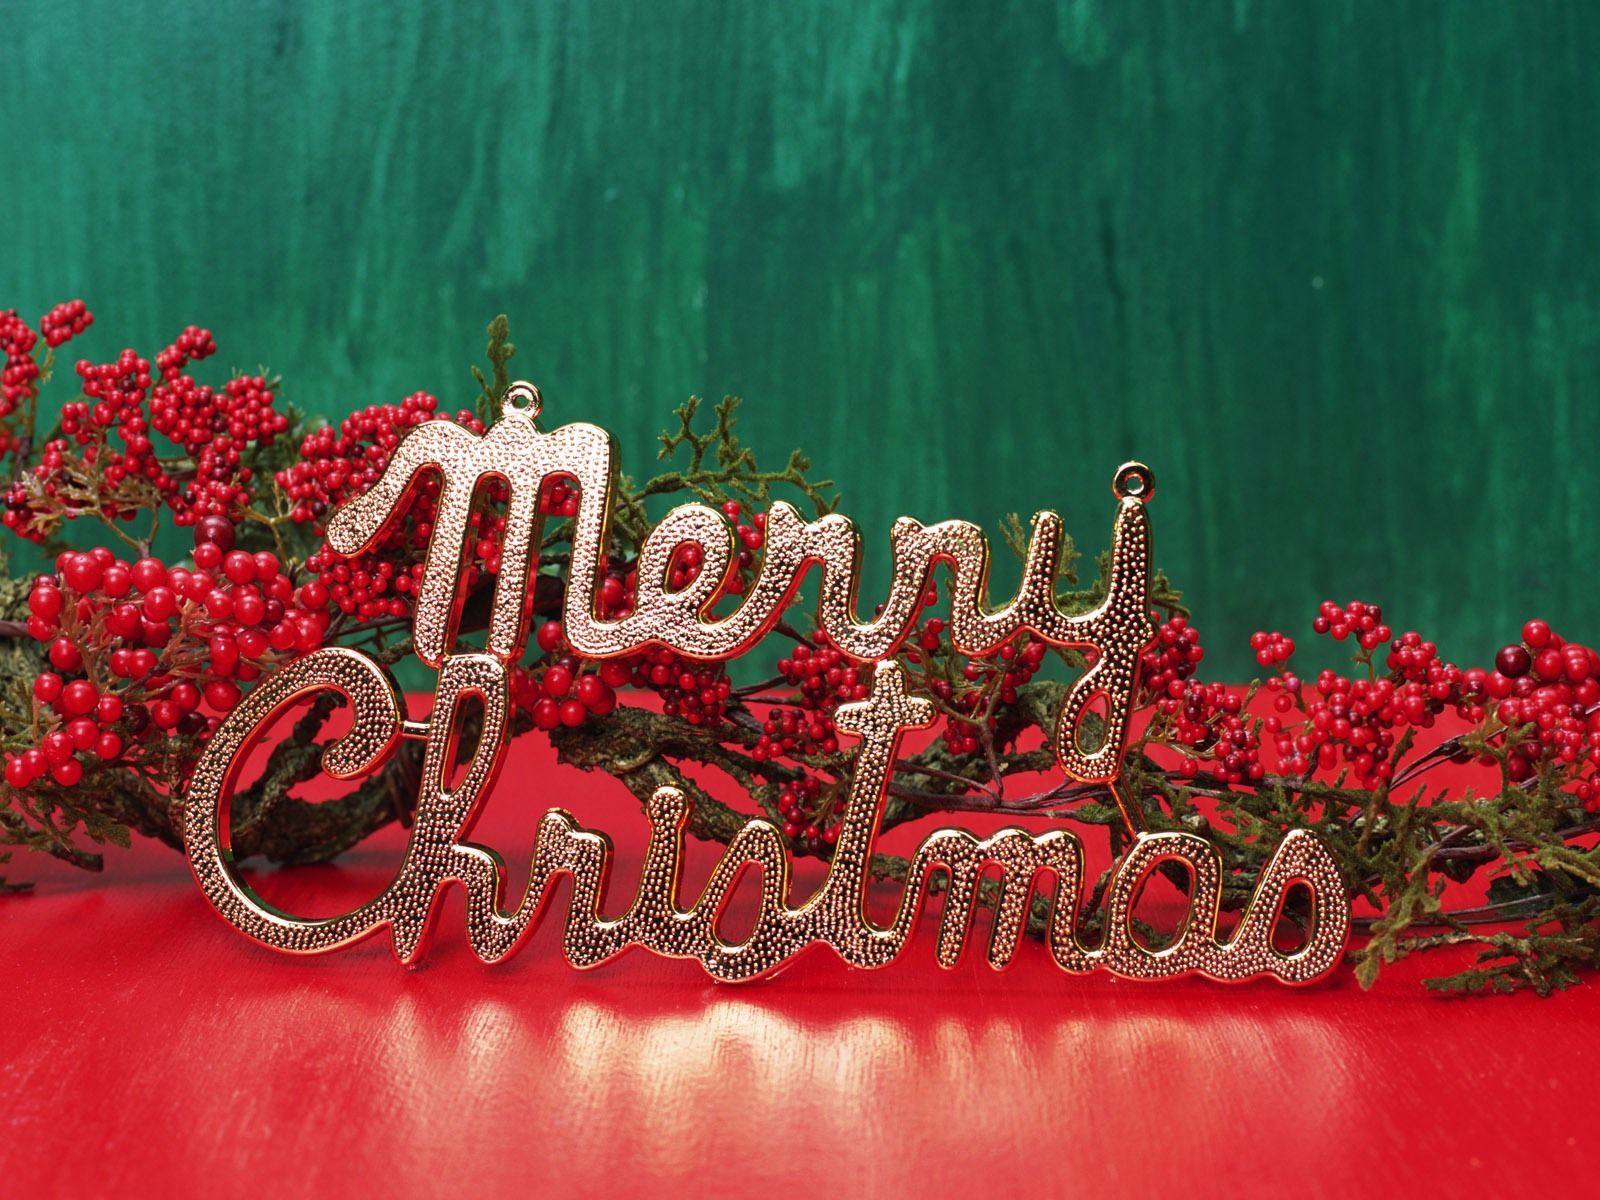 2015 merry Christmas backgrounds desktop - wallpapers, images